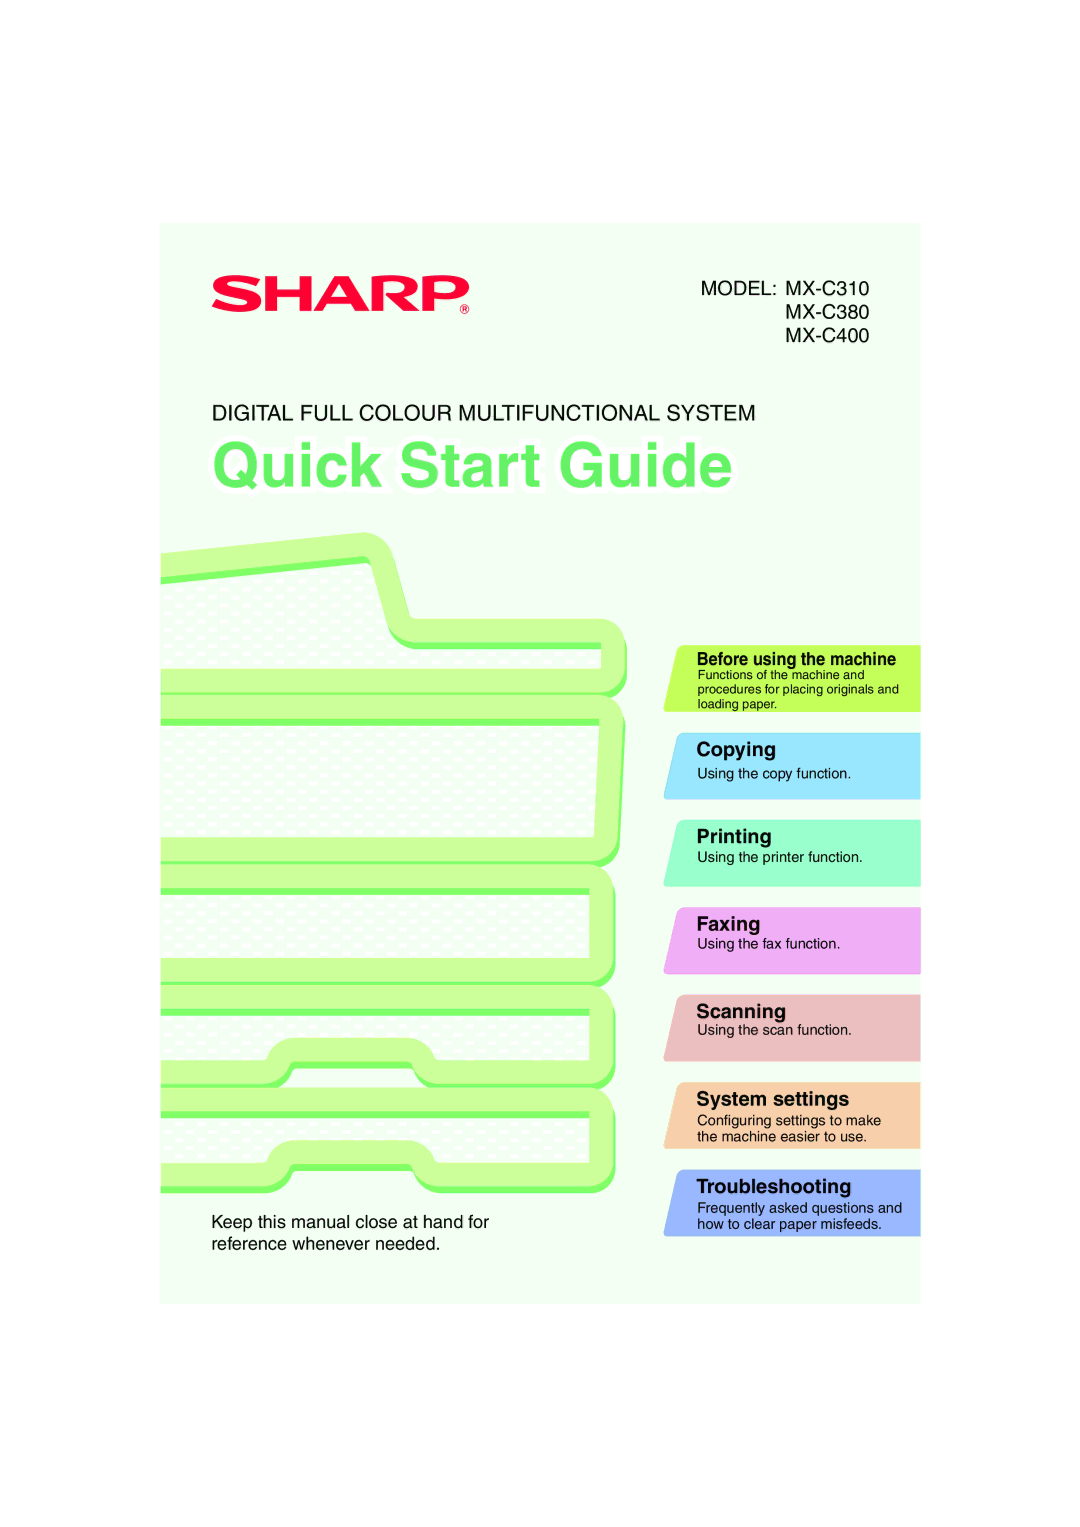 Sharp MX-C380, MX-C310, MX-C400 quick start Copying, Printing, Faxing, Scanning, System settings, Troubleshooting 